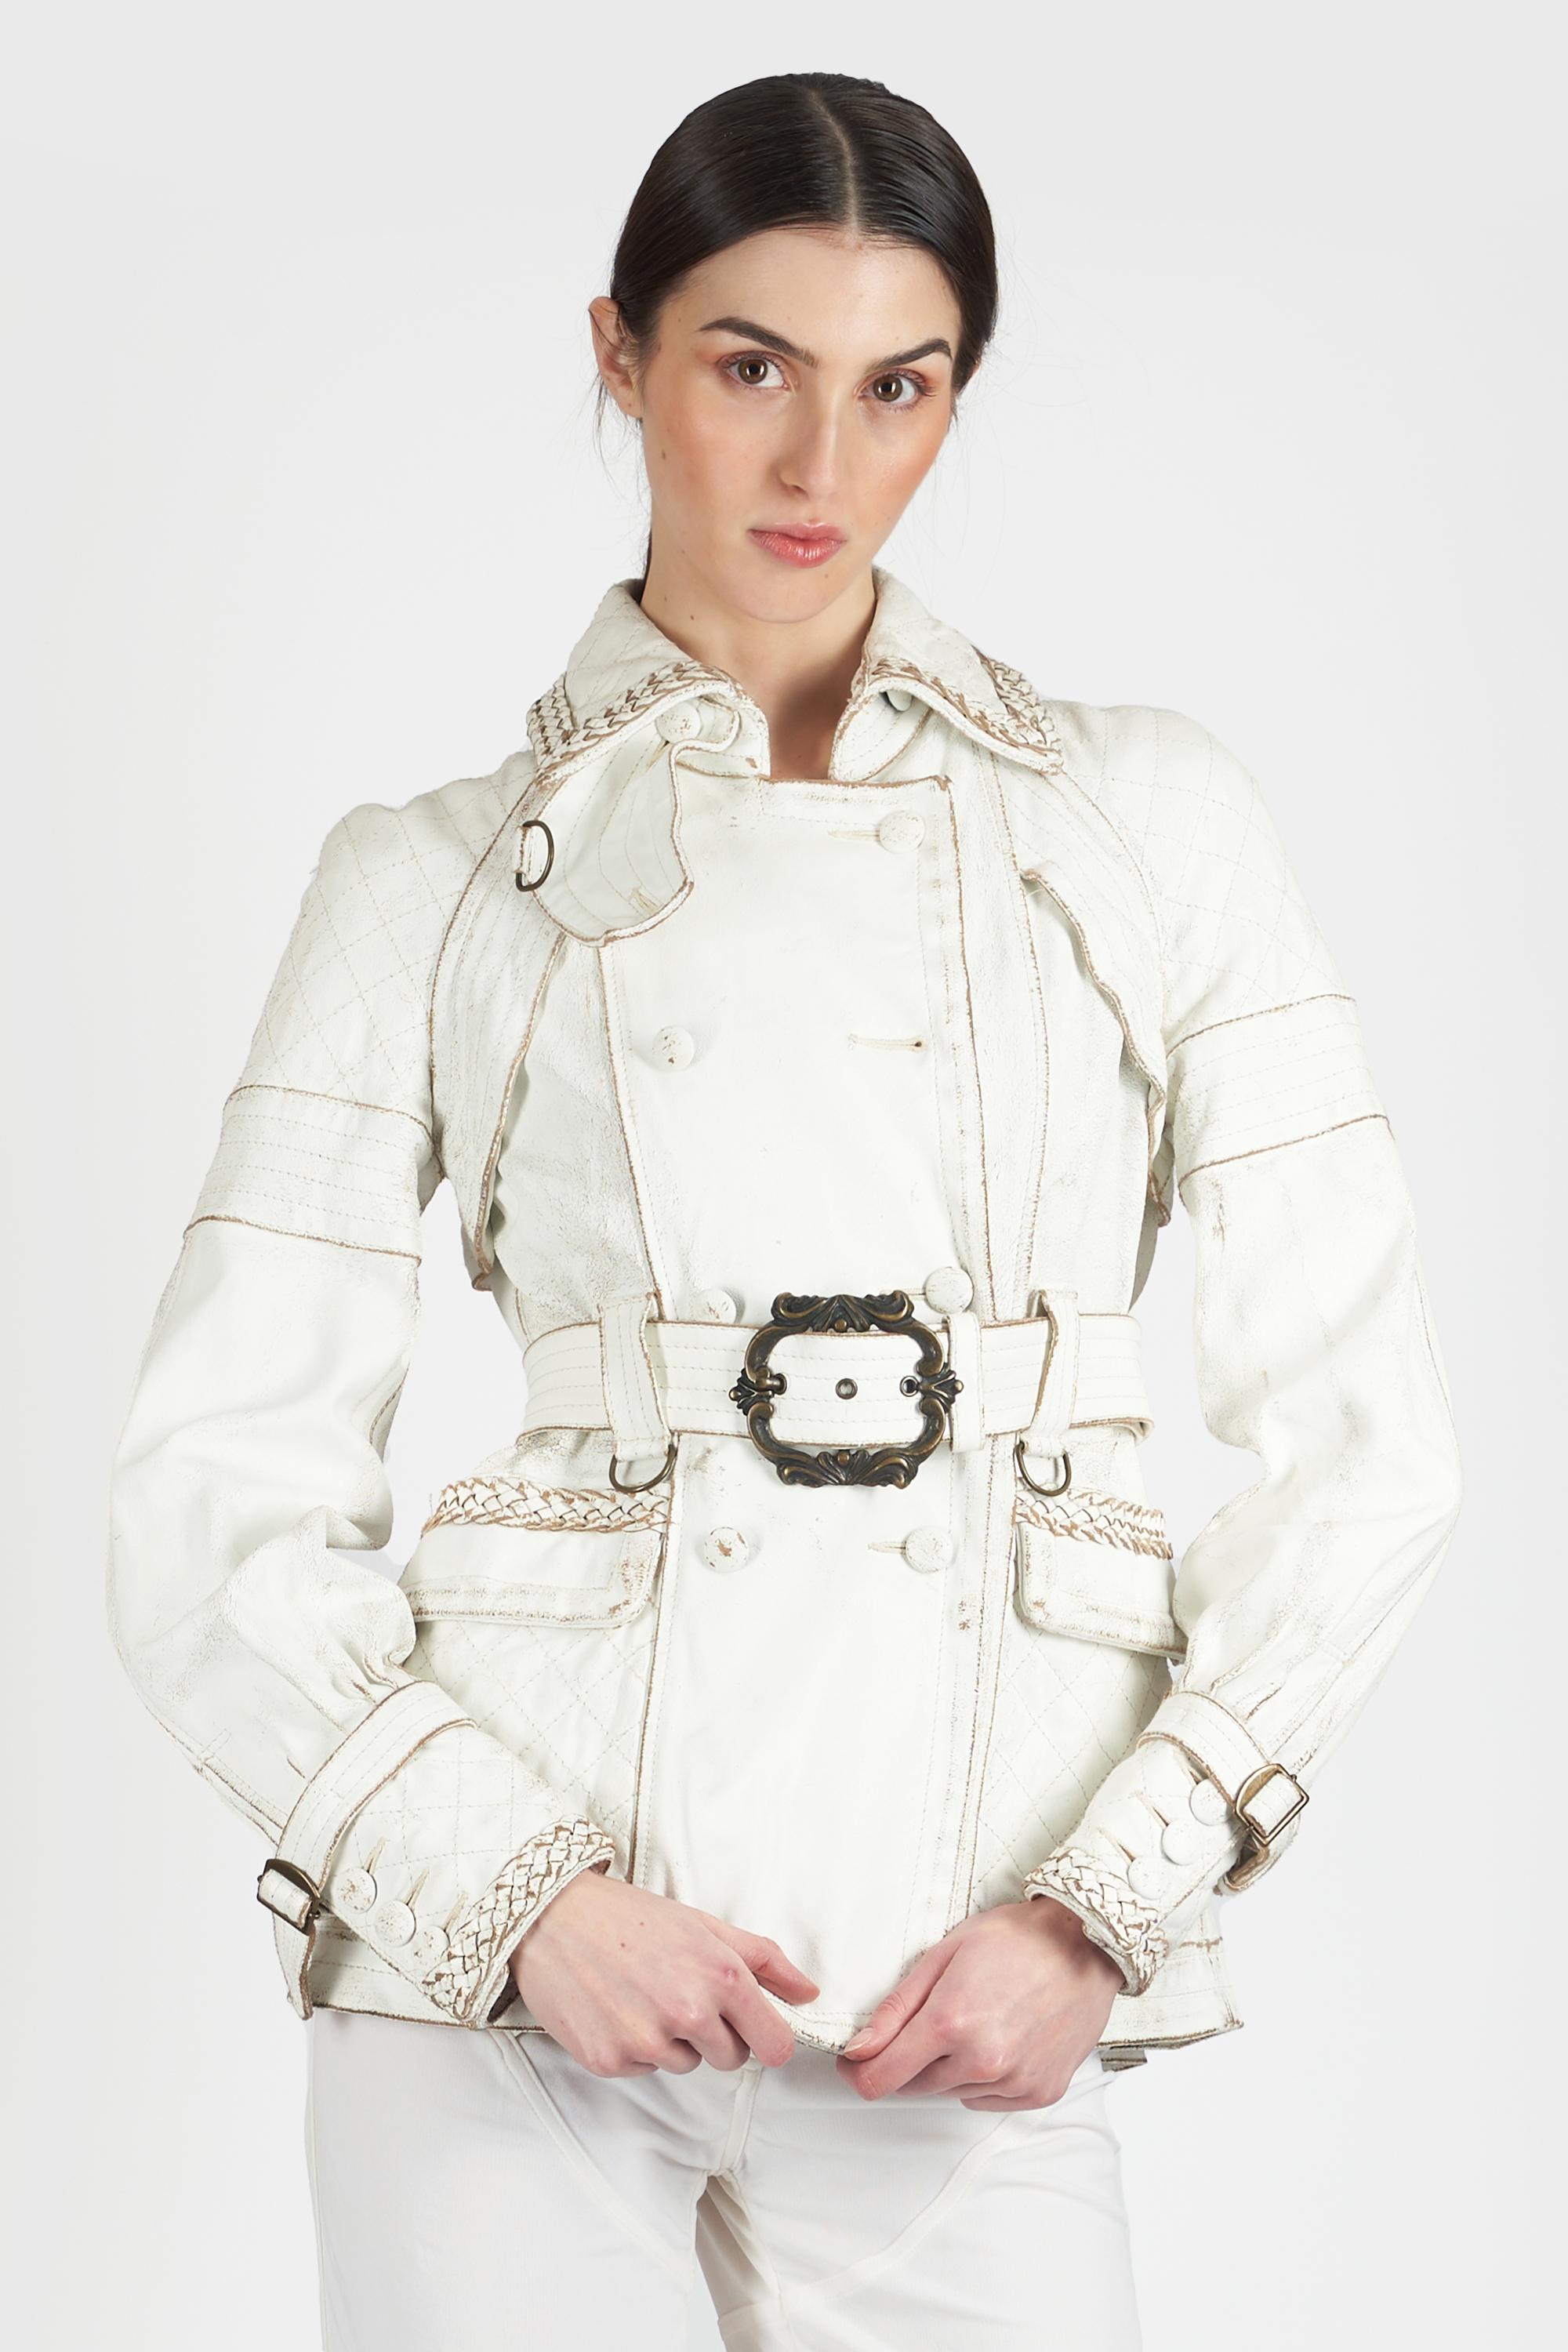 Roberto Cavalli 2000’s white jacket. Features distressed leather, a belt and button closure. In great vintage condition, please note there is one button missing.

Brand:Roberto Cavalli
Size:UK 8
Color: White
Label size: 40 IT
Modern size: UK: 6 to